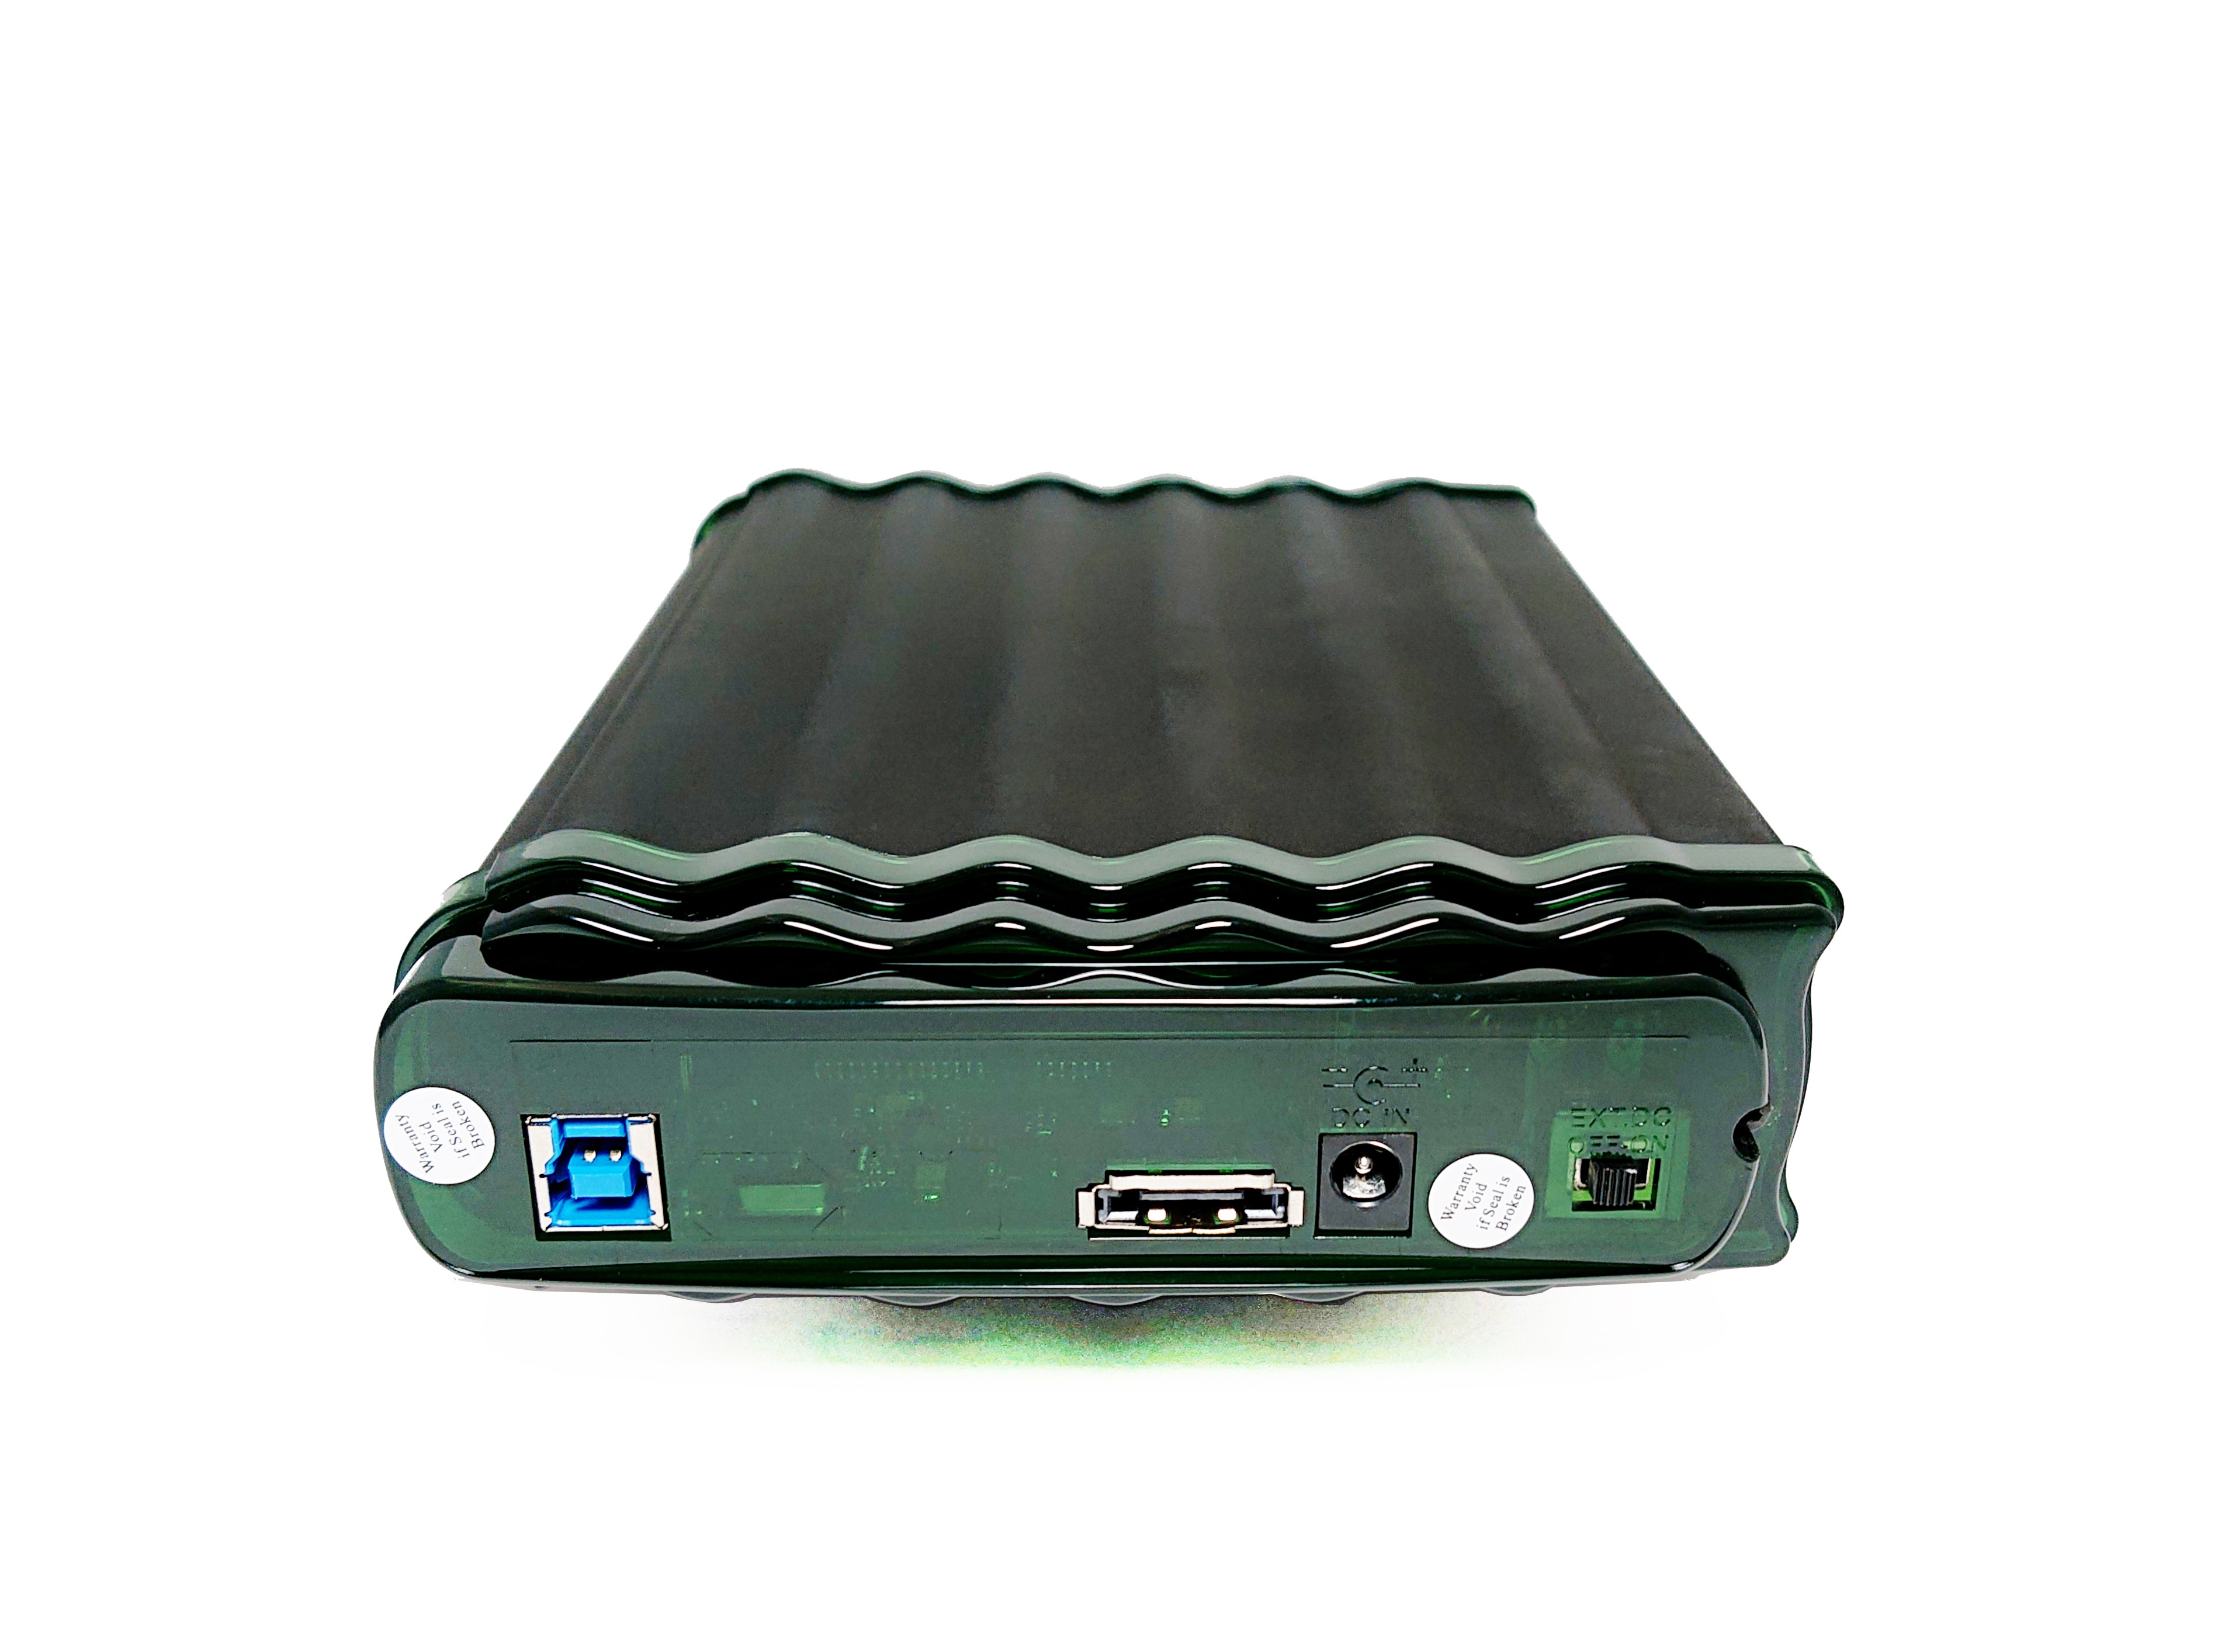 crypto drive fips 140-2 encrypted usb 3.0